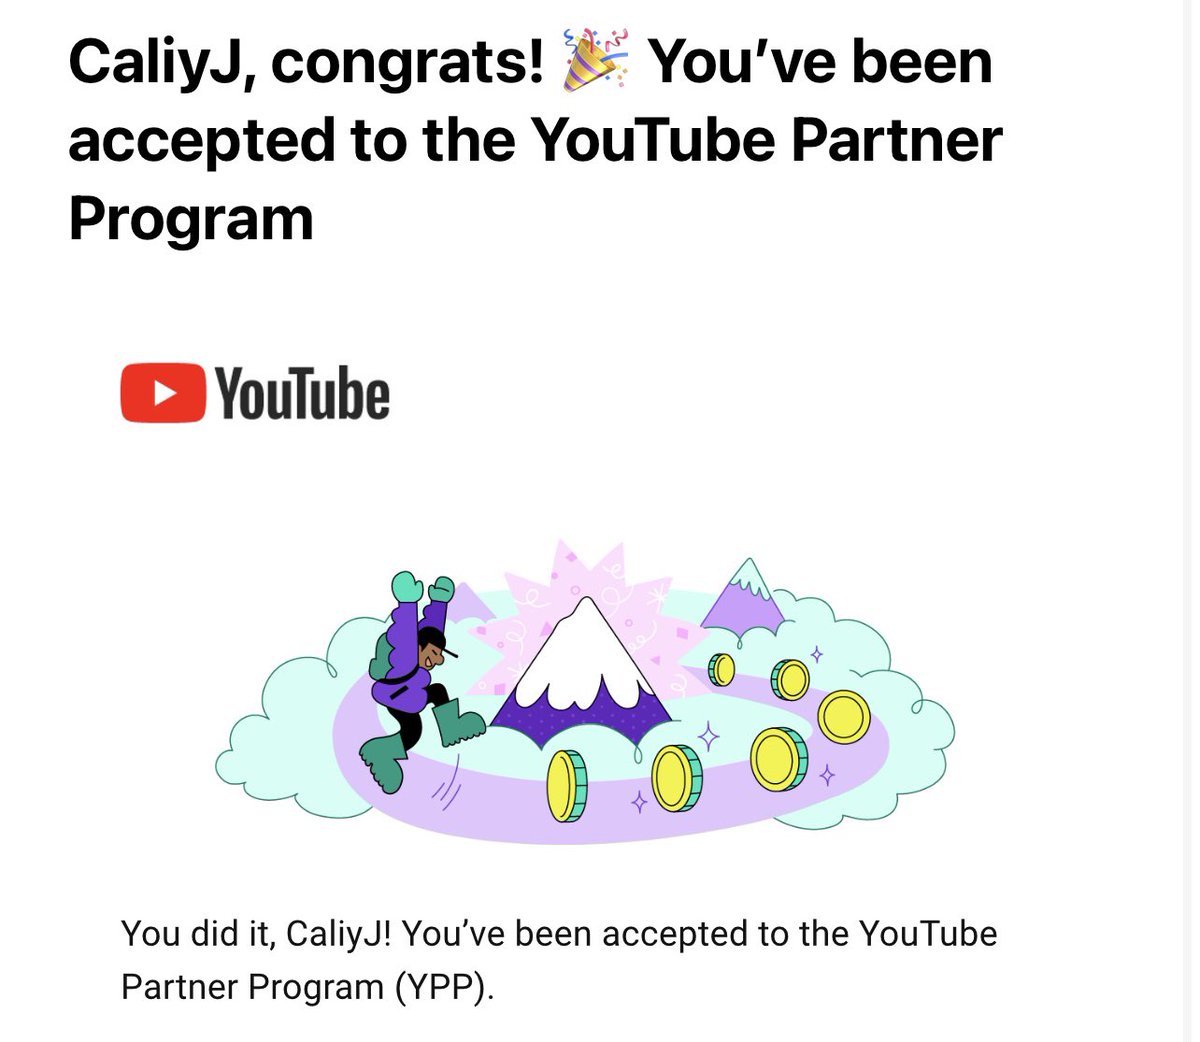 Todays the day I finally become monetised 😍 this is a huge huge blessing! ❤️ 

I want thank everybody greatly and I promise to always put in 100%! 

I’m very grateful to be in this position! 
This isn’t possible without you beautiful folks 💯 
#ADreamComeTrue #YoutubePartner